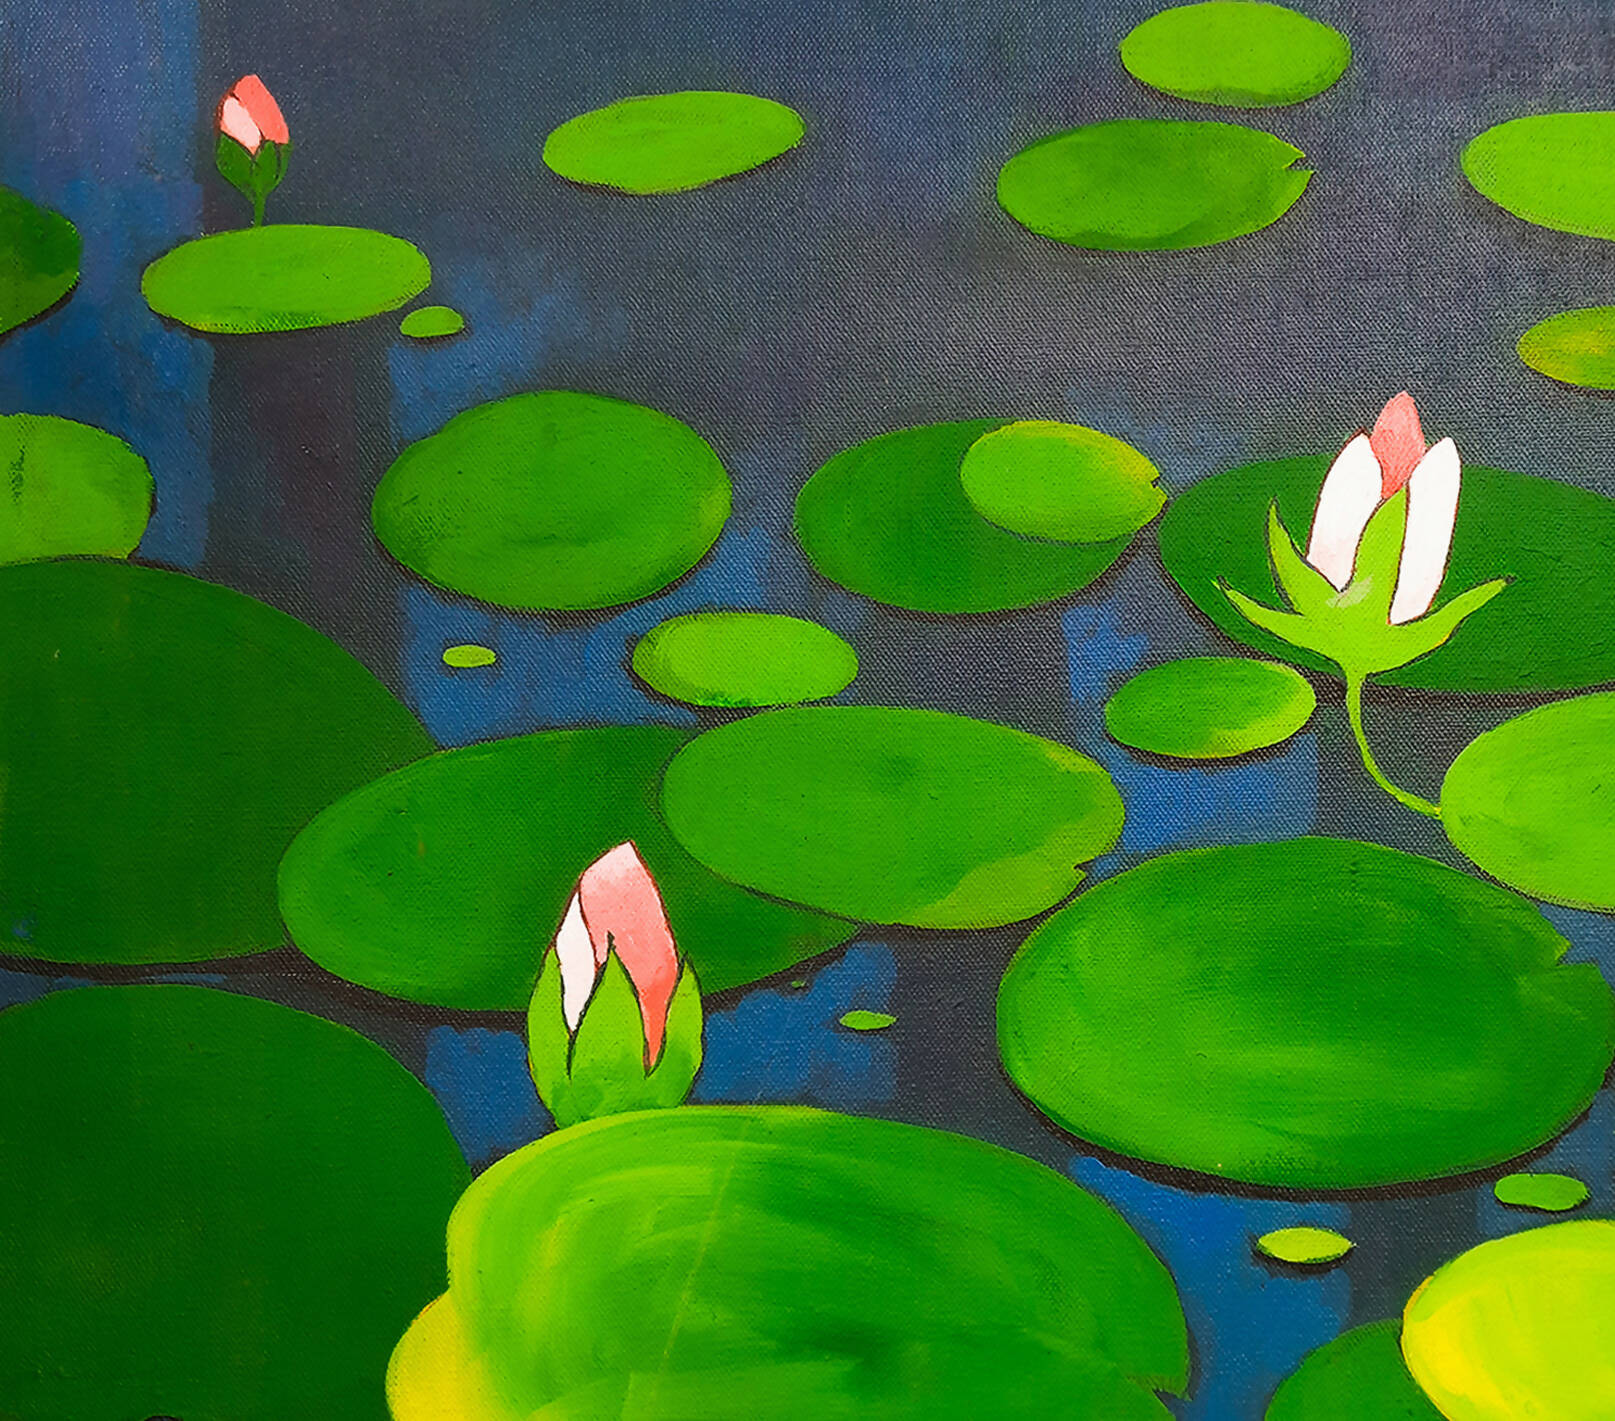 Beauty of water lilies /Painting on canvas